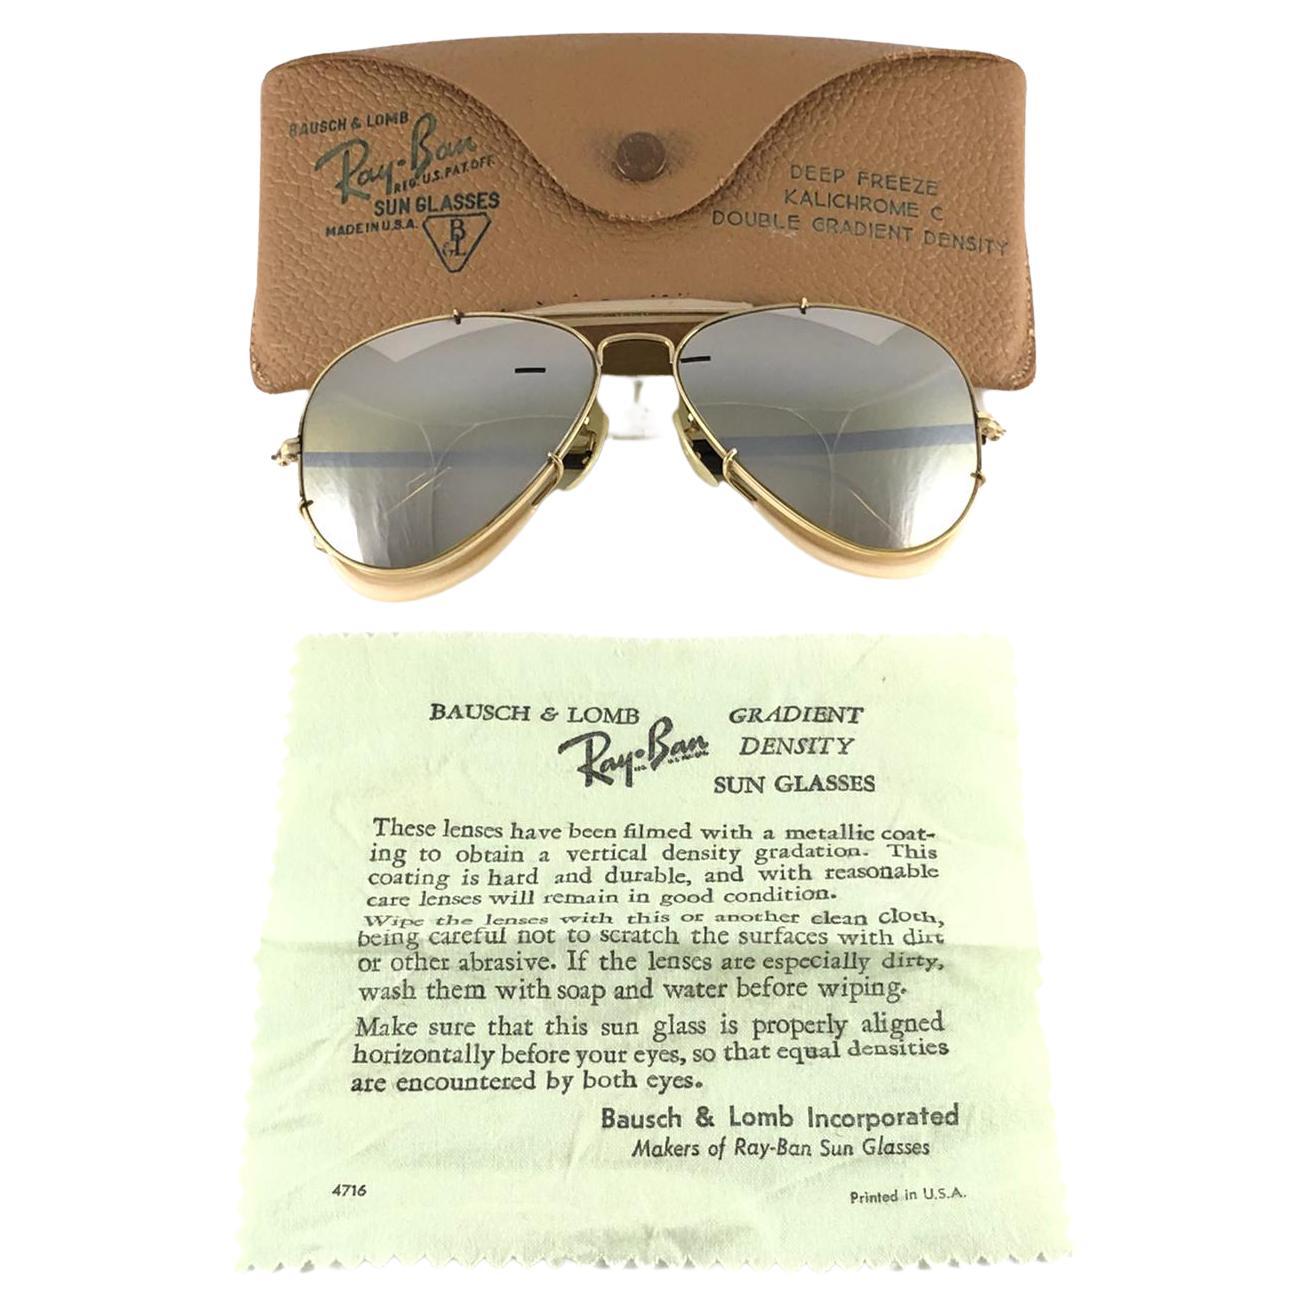 Superb Collectors Item

There isnt any pair more rare than these, especially new, maybe 4 or 5 still exist: The 1955 Deep Freeze 12k Gold filled outdoorsman sporting kalichrome lenses.
Straight earpieces with the dark brown plastic all around. White